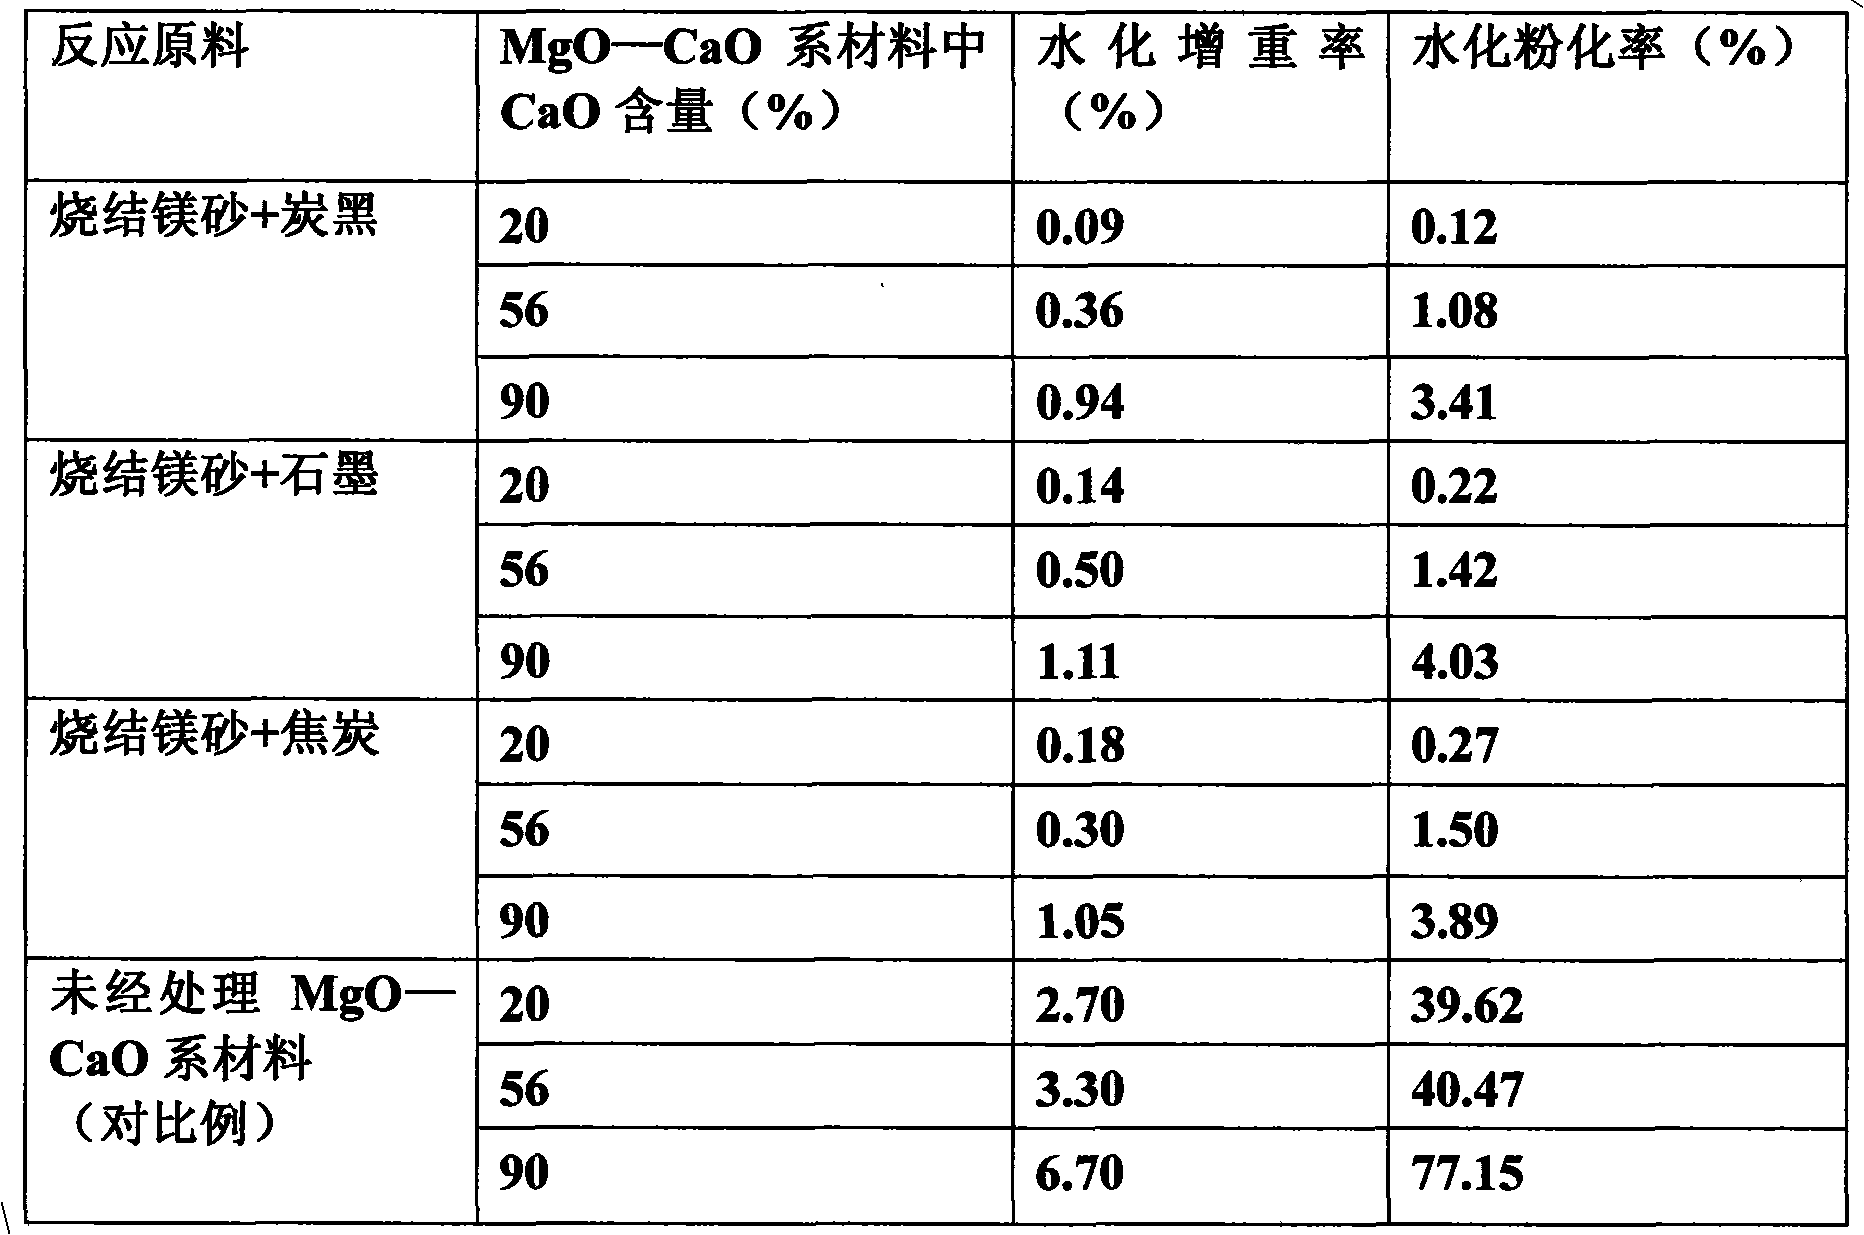 Hydration-resistant MgO-CaO series fireproofing material and preparation method thereof